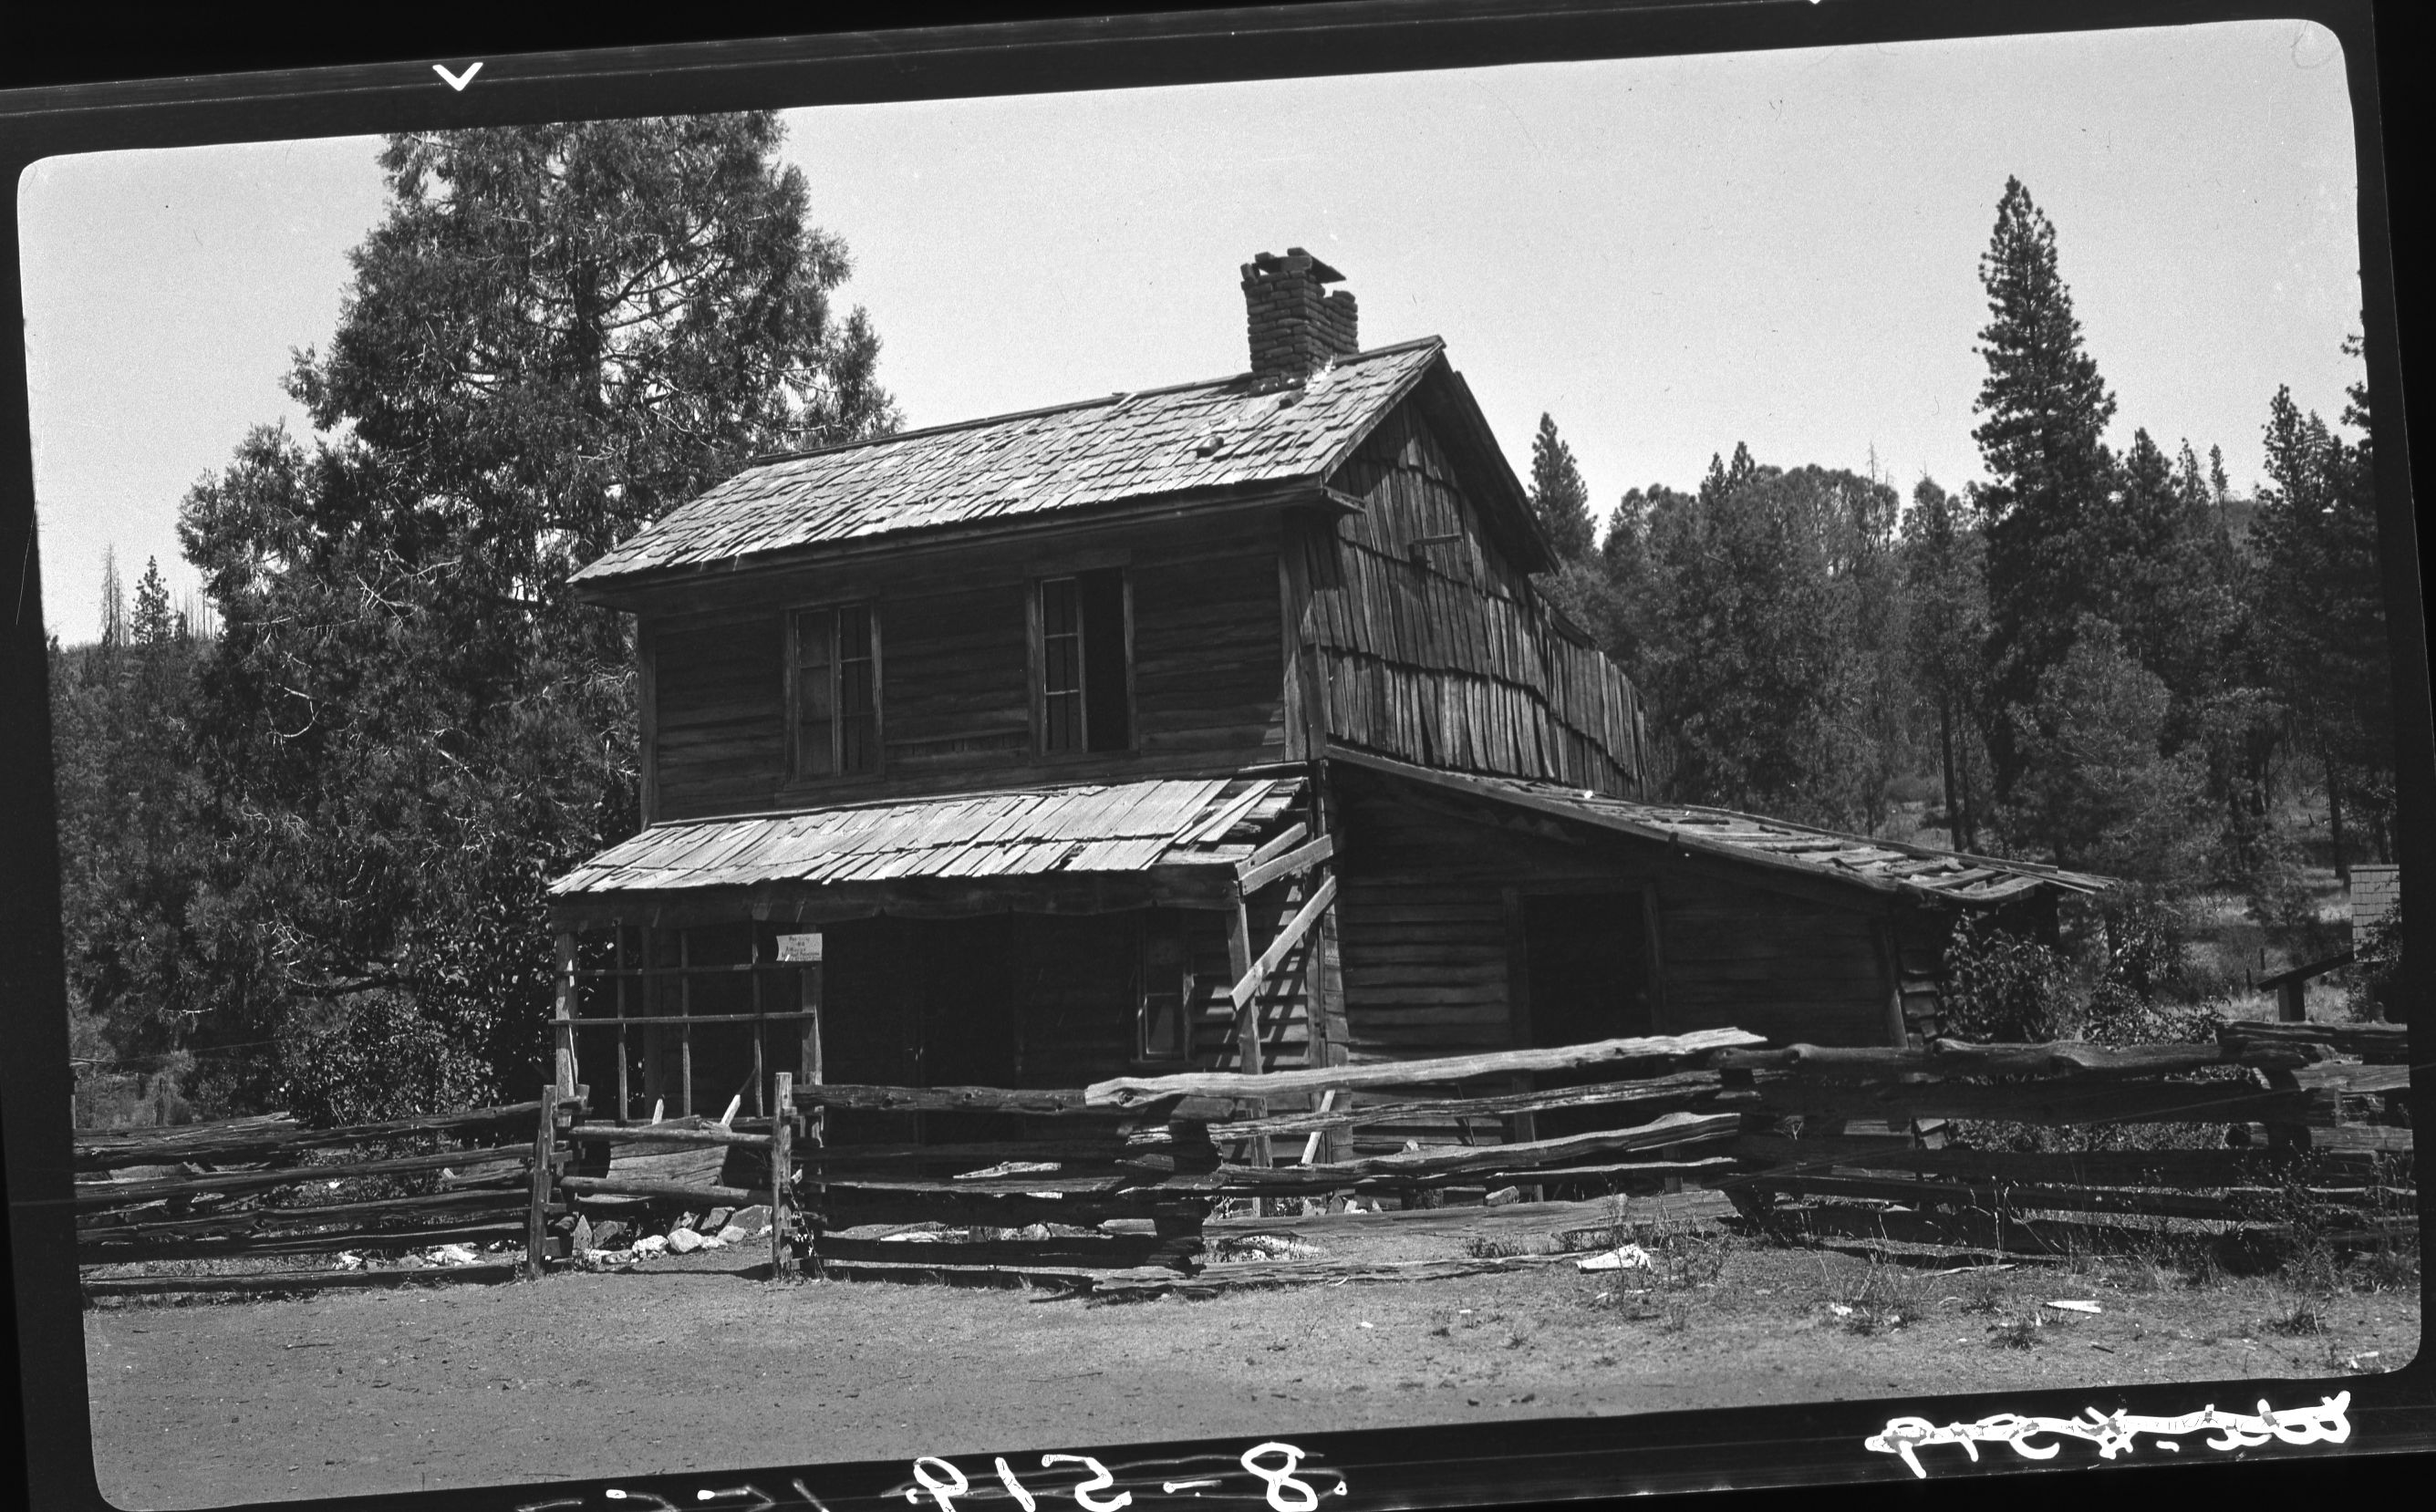 Home of Tennessee and his partner. Sometime referred to as the Bret Harte cabin. Chaffee and Chamberlain's cabin. (Bret Harte based his short sketch on them titled "Tennessee's Partner"." See also "The Big Oak Flat Road" by Irene Paden & Margaret Sclichtmann.